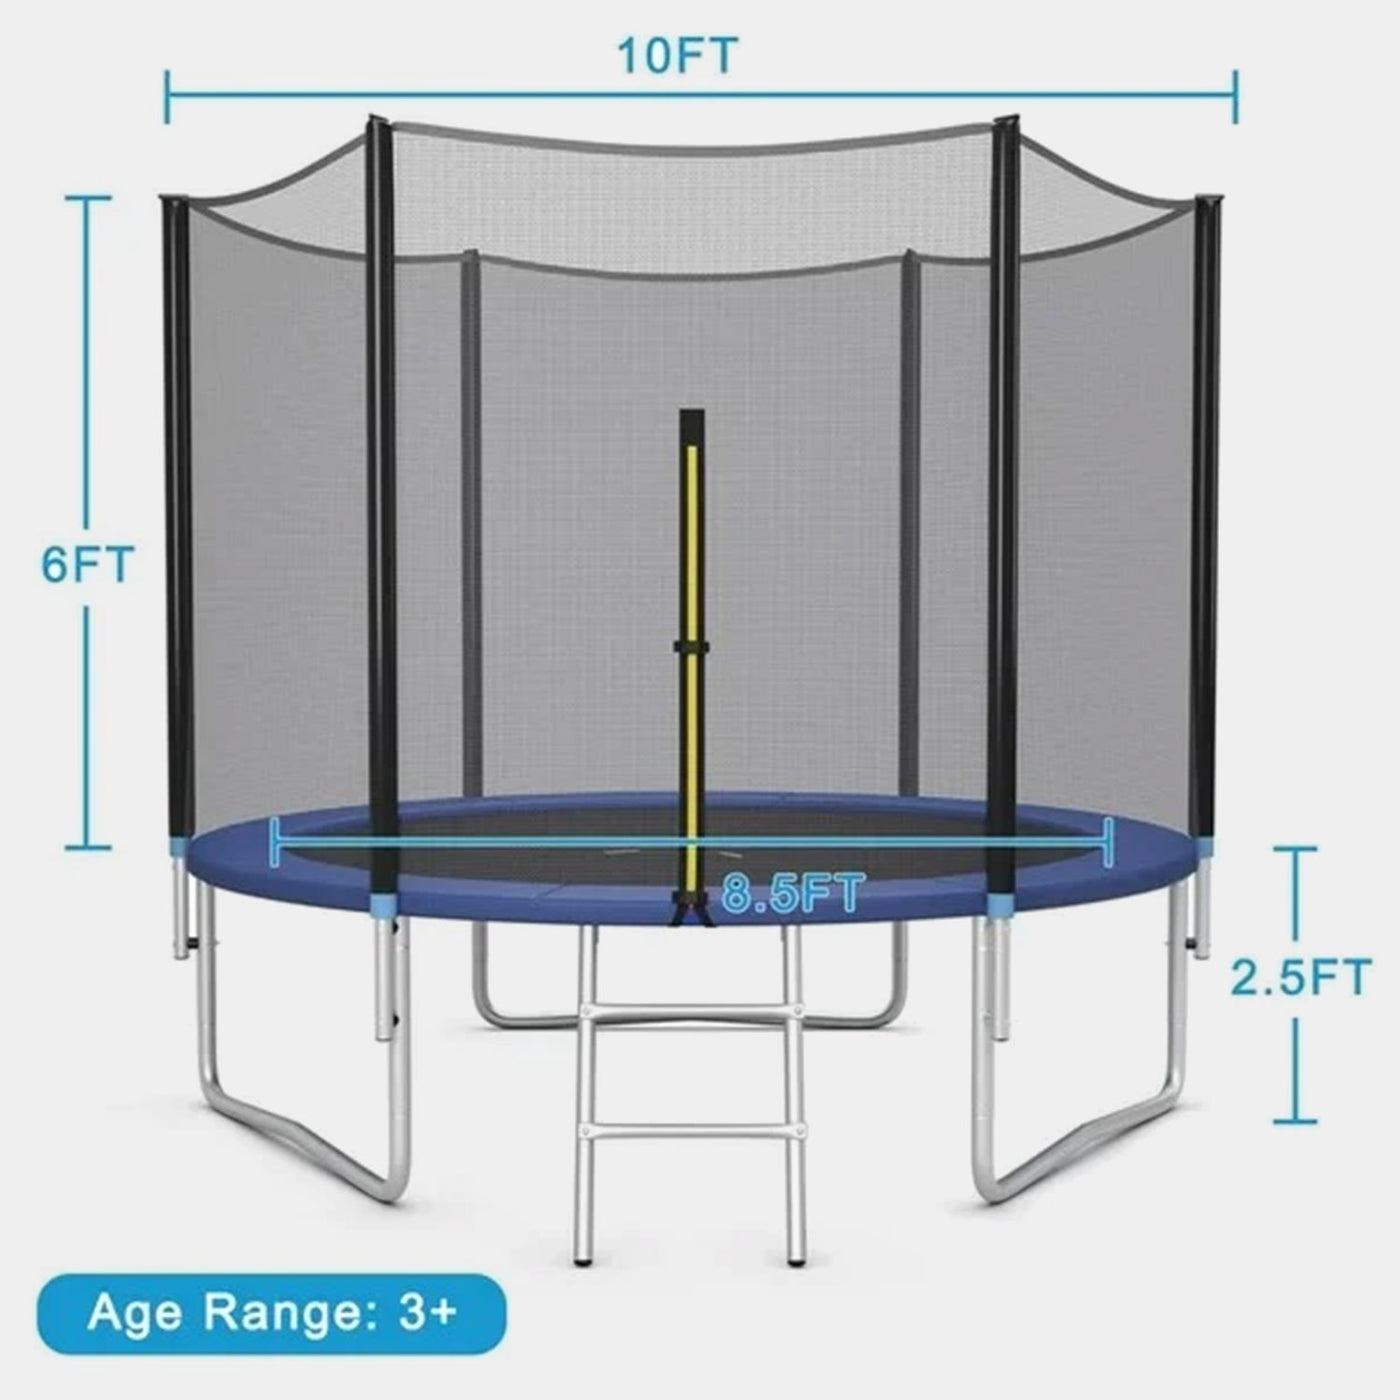 10 Feet Round Trampoline and Enclosure with spring kids bounce ring